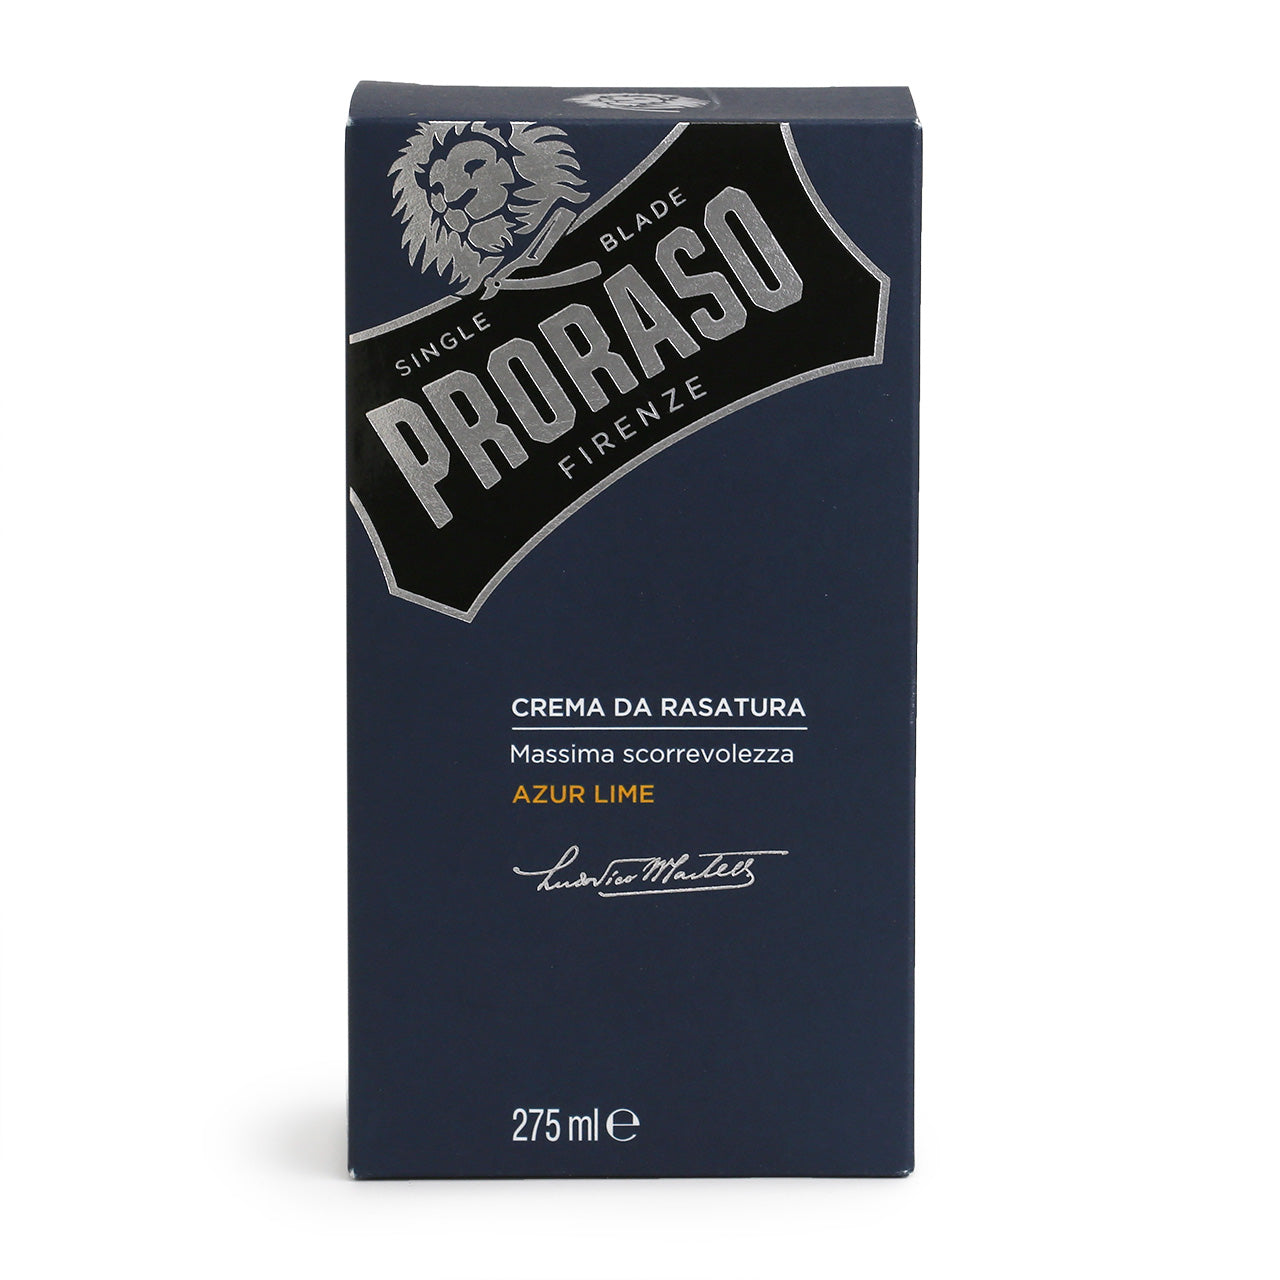 Proraso shaving cream Azure lime is a 275ml pouch in a navy blue box